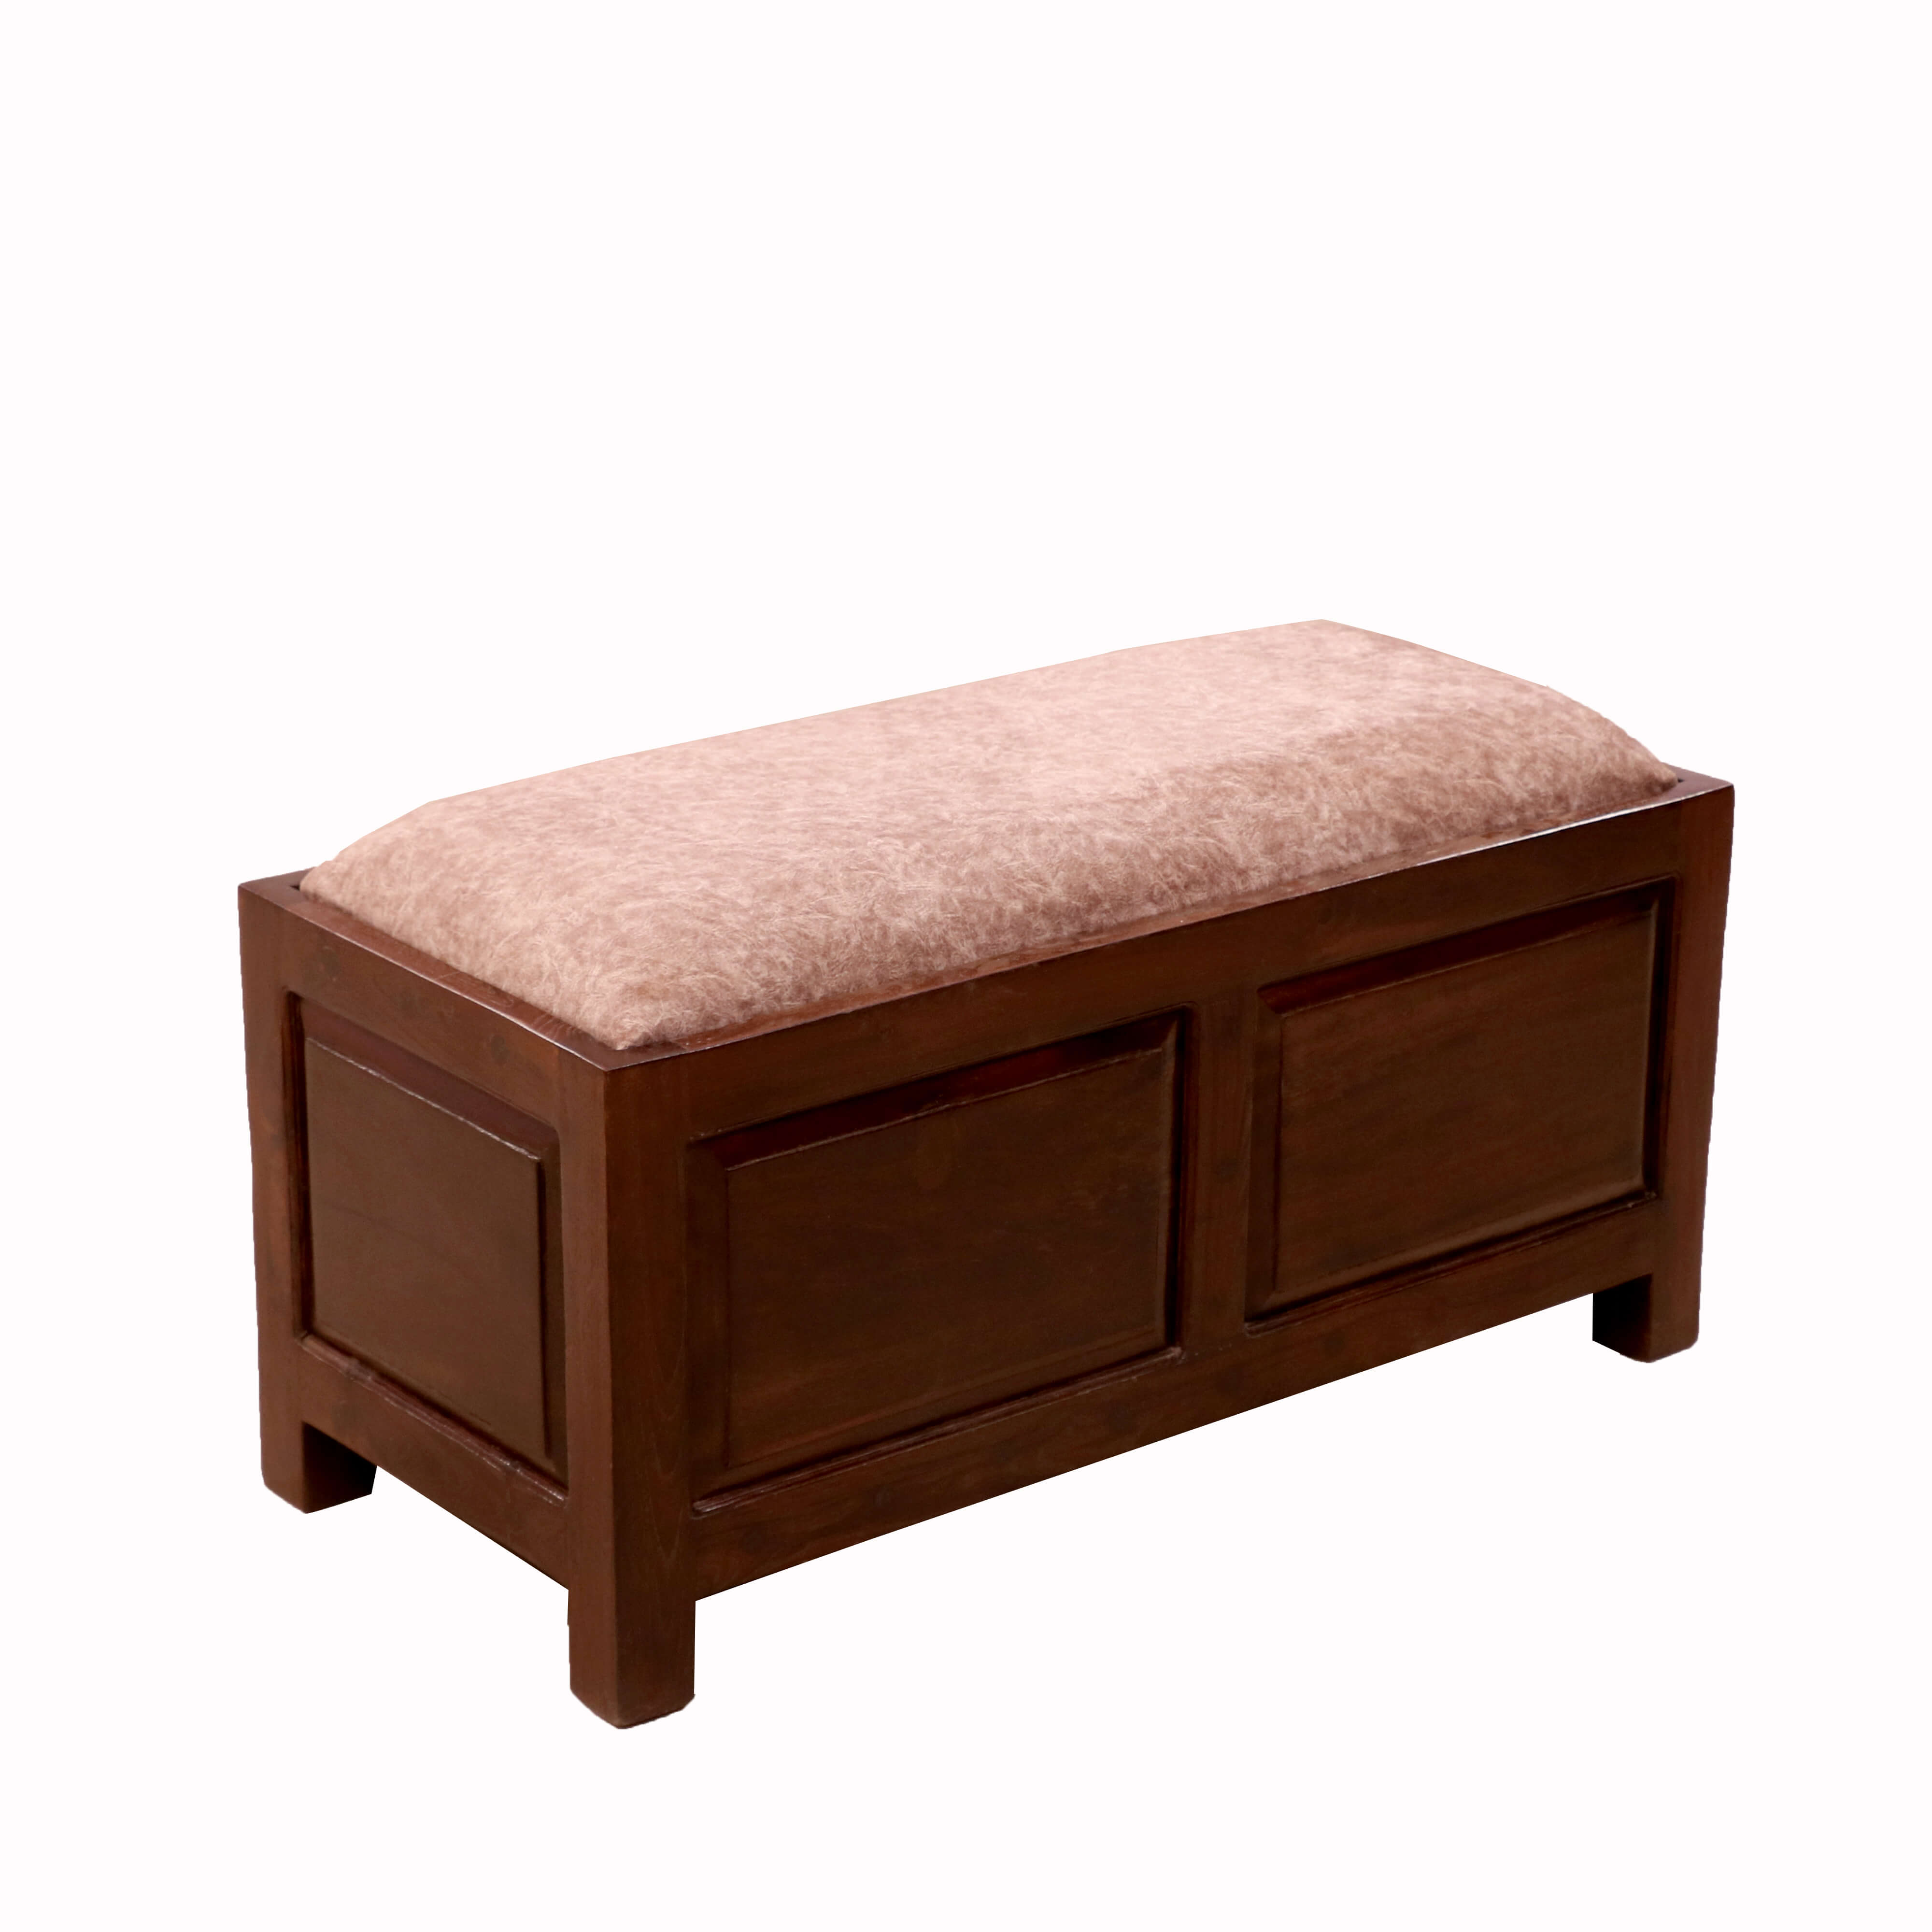 Simple endearment 2 Seat with storage Bench